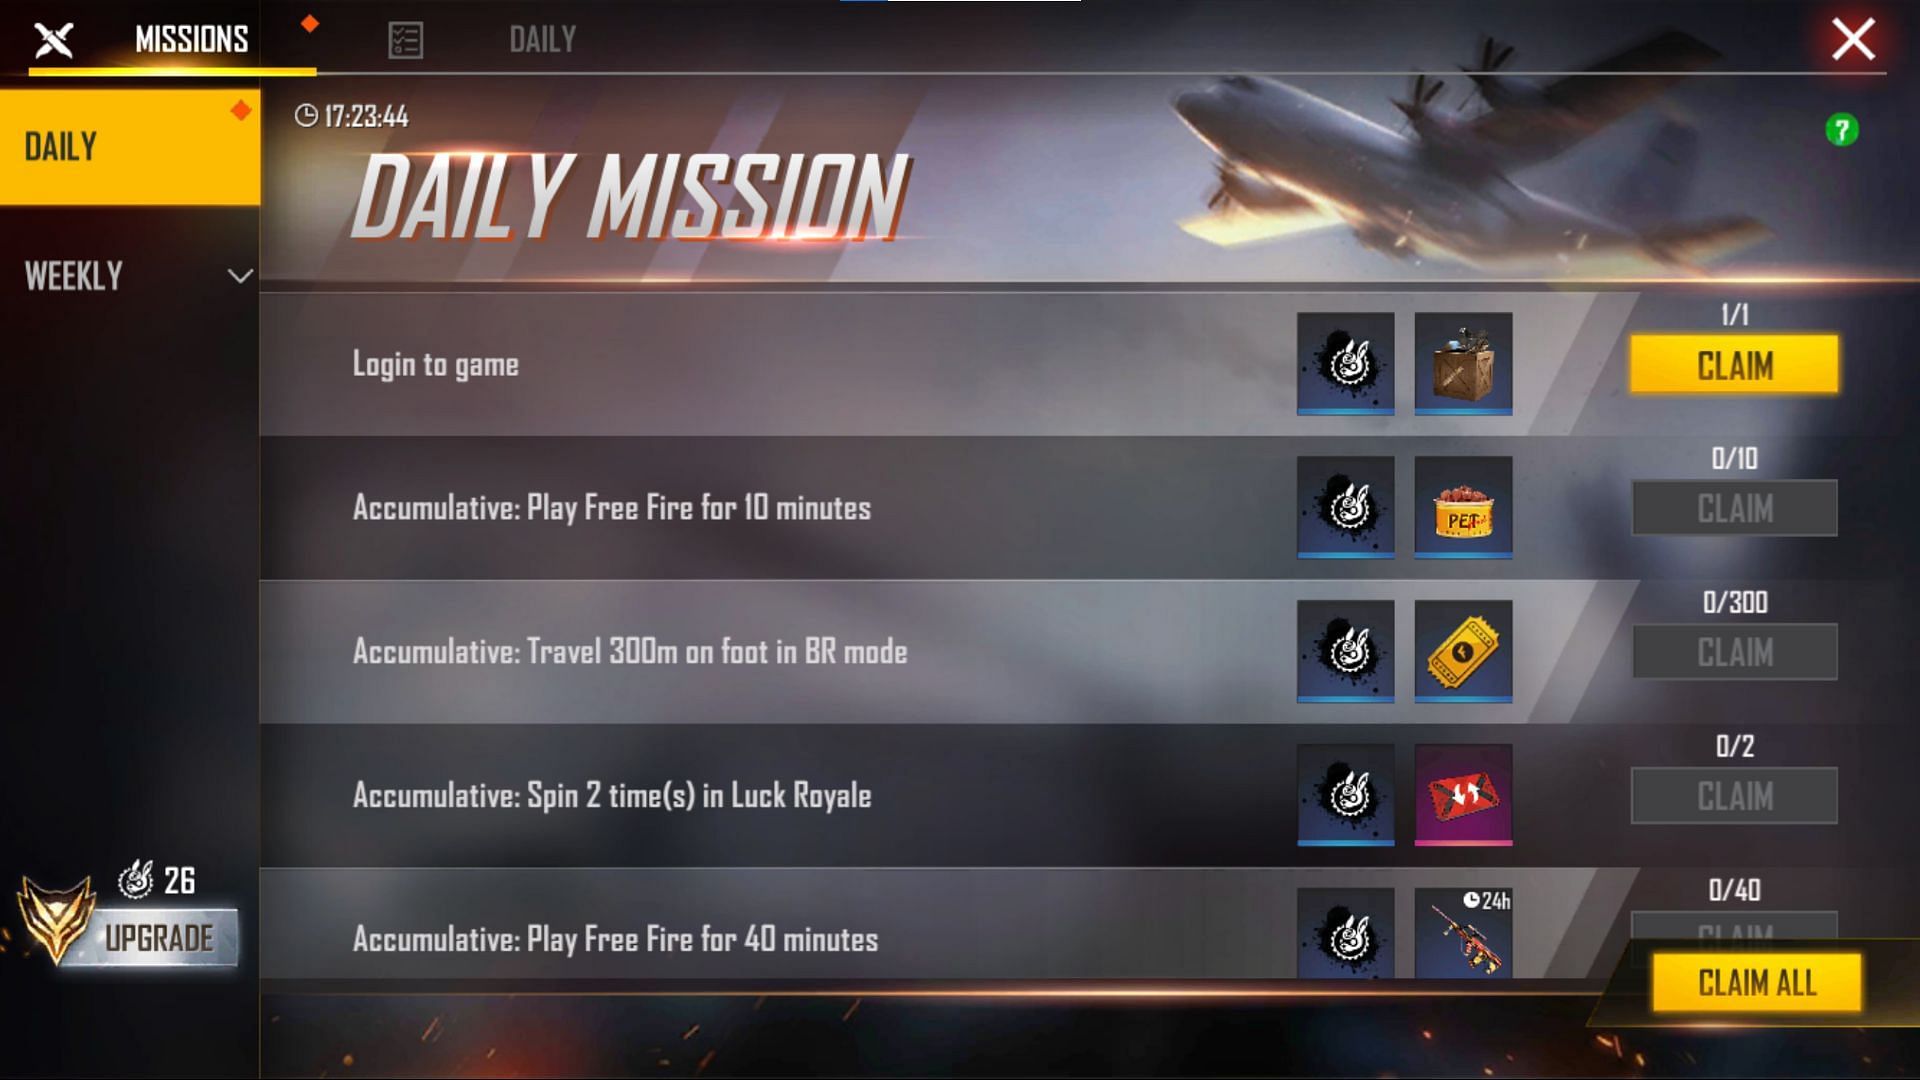 Badges can be earned through missions (Image via Garena)